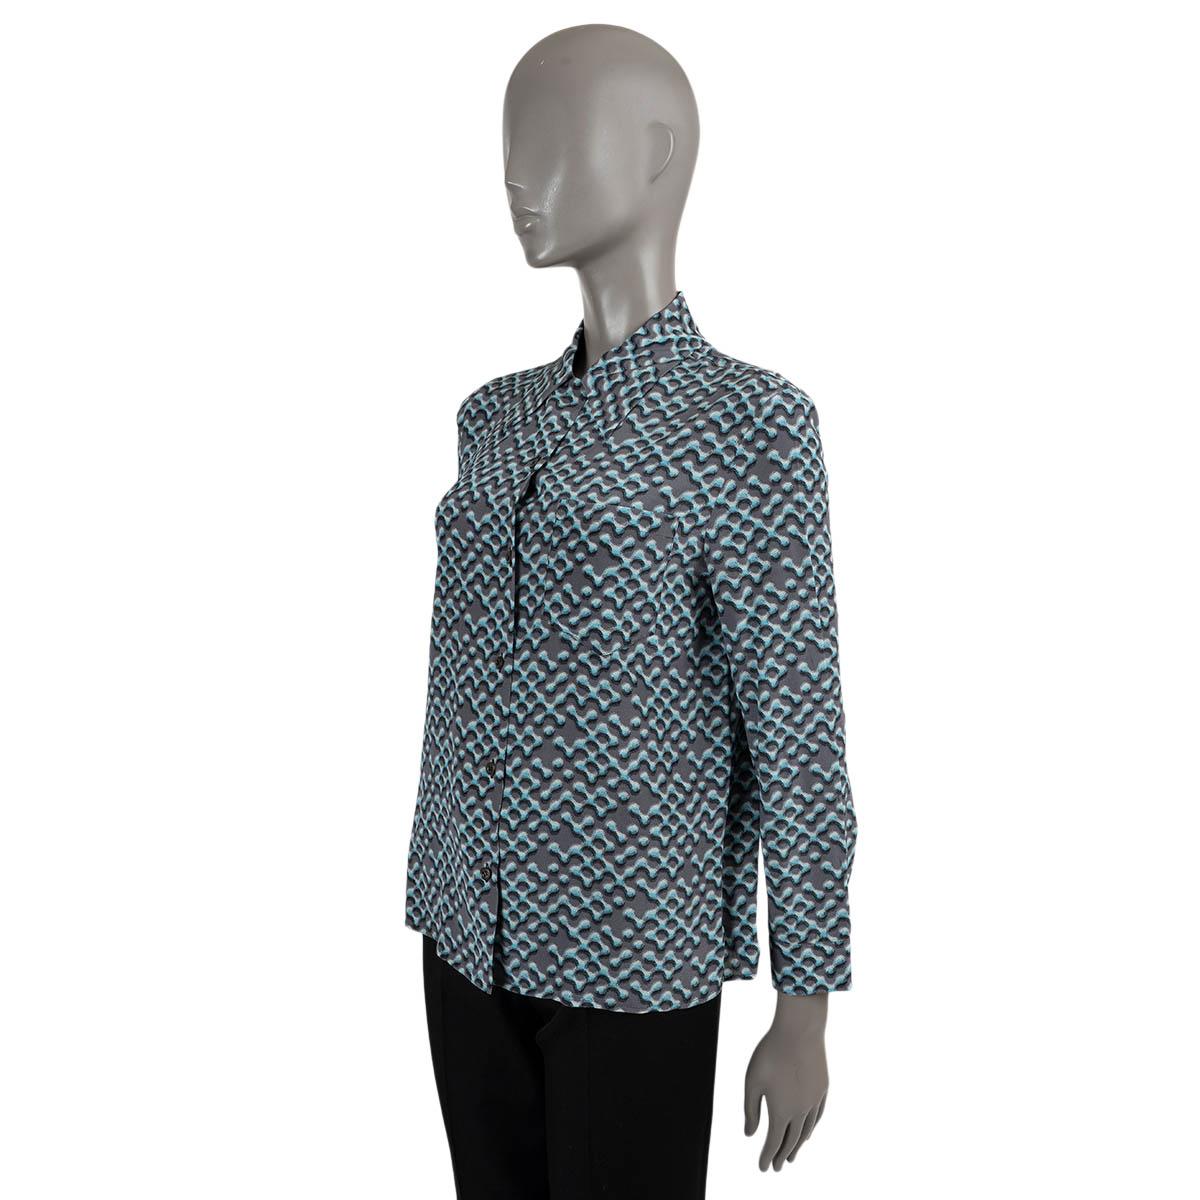 100% authentic Prada blouse in dark grey and light blue silk (100% - please note the content tag is missing). Features a blurry print and chest pocket. Closes with buttons on the front. Has been worn and is in excellent condition. 

2015